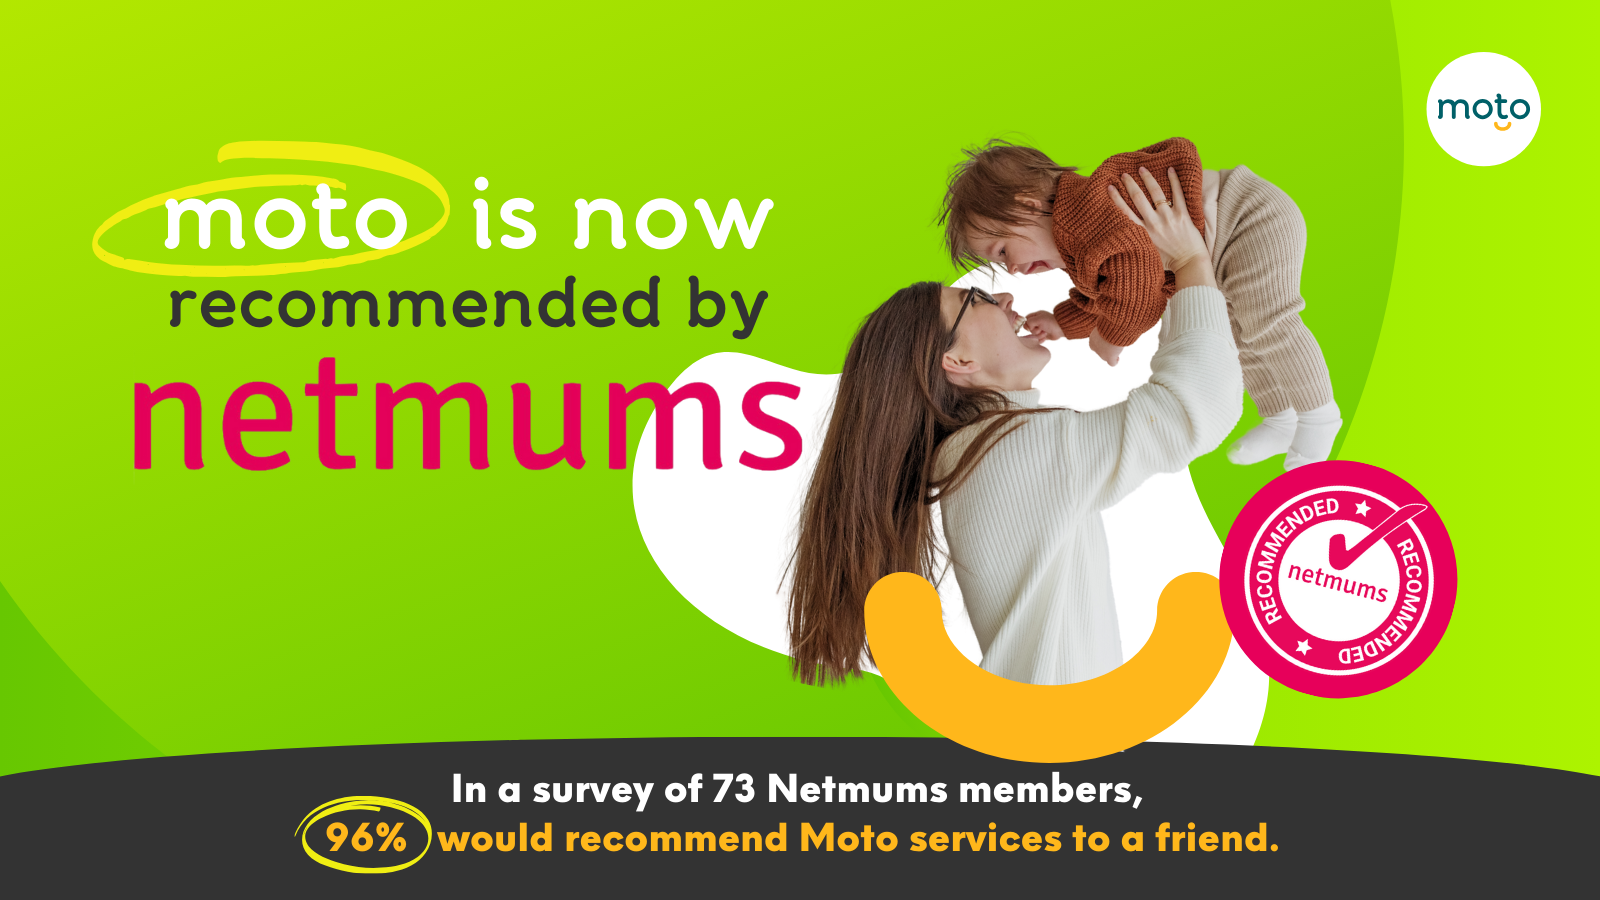 Moto has been been awarded the Netmums Recommended stamp of approval!